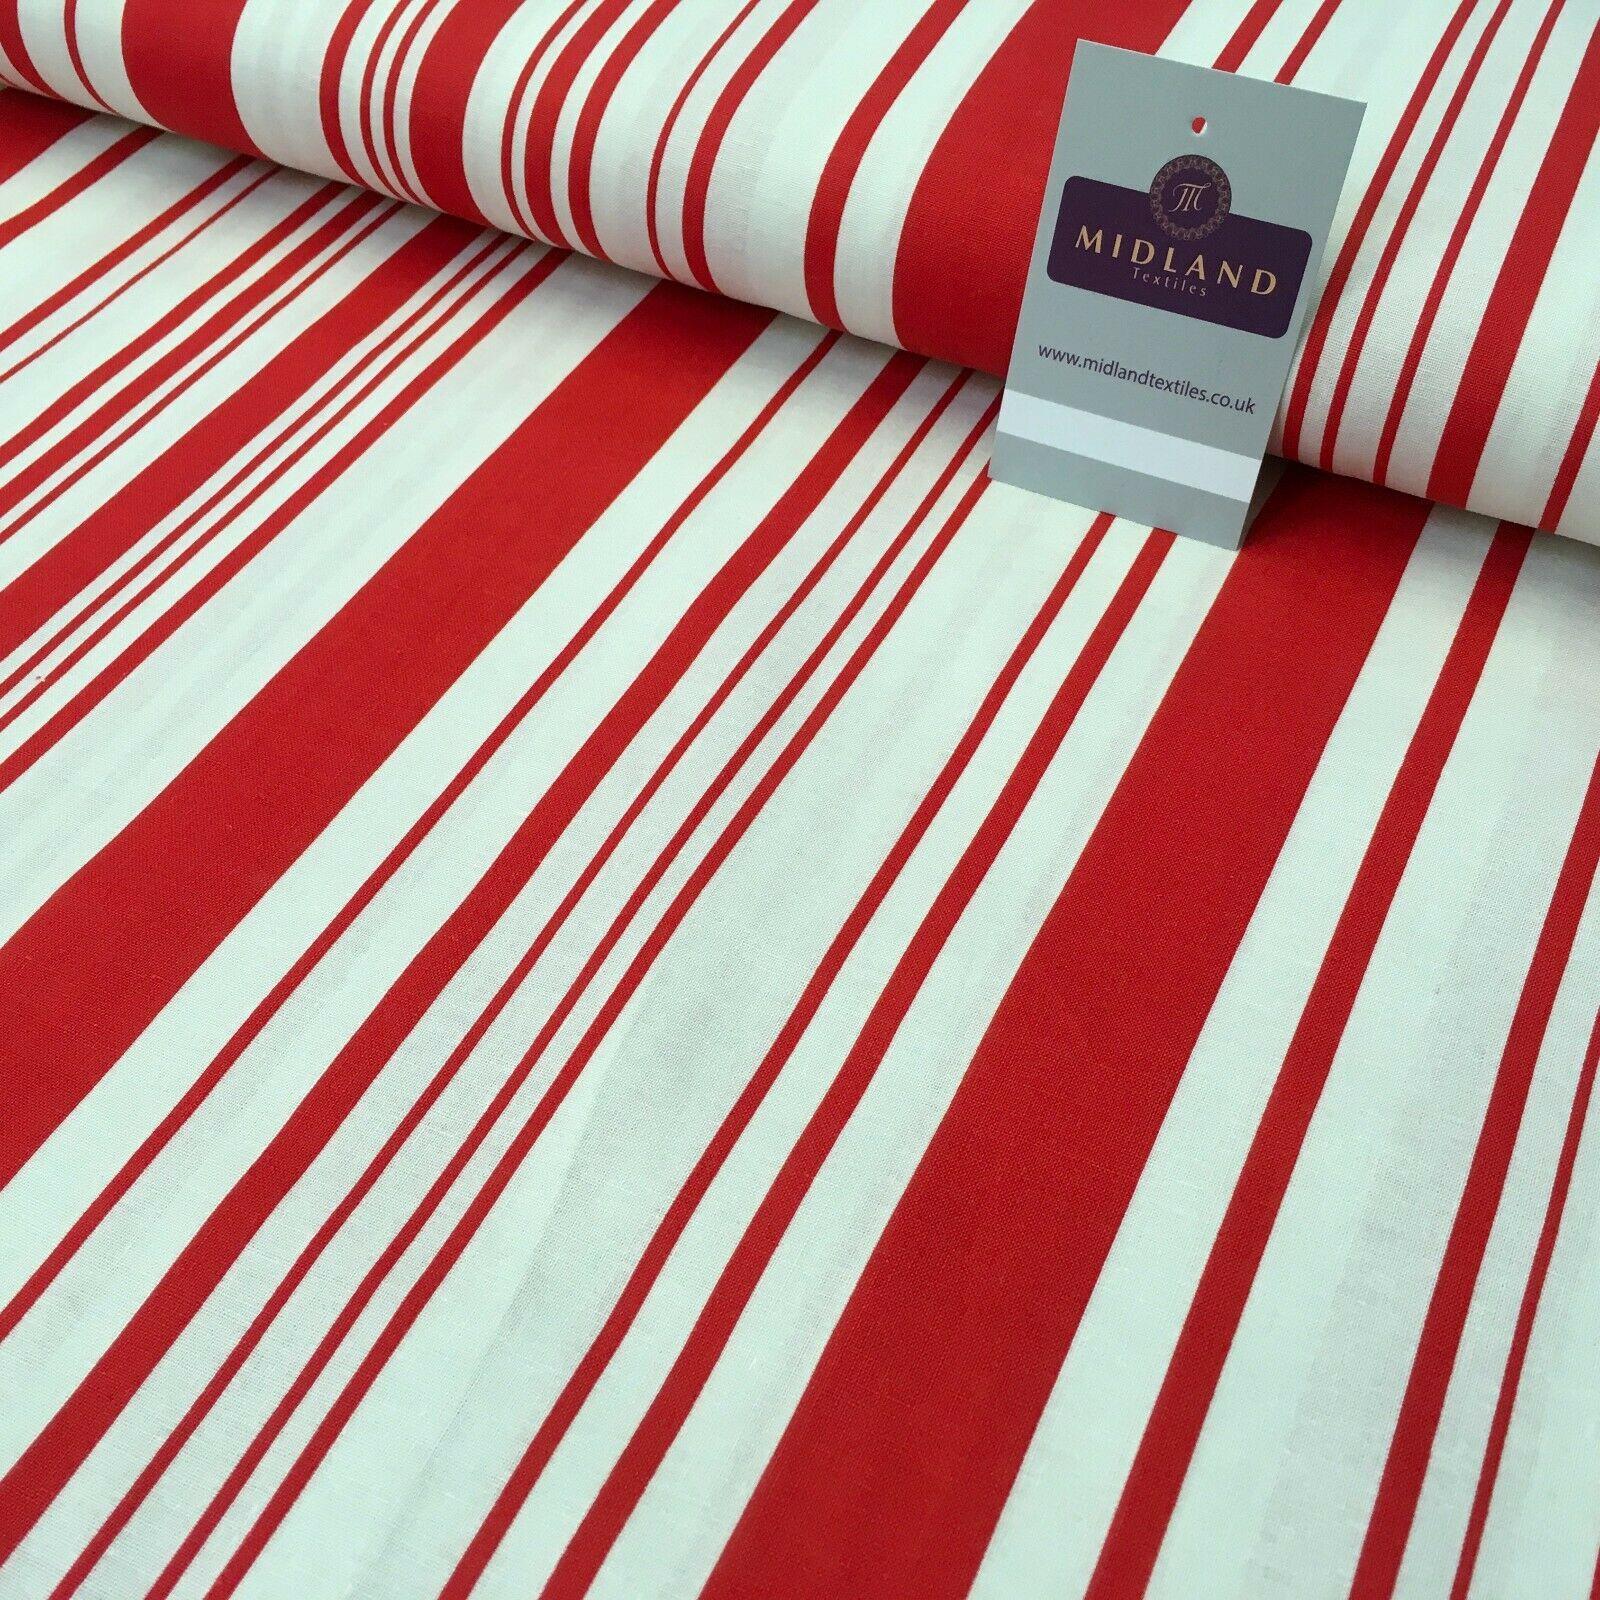 Red Striped Printed Cotton Linen Dress Fabric 150cm Wide MK1086-5